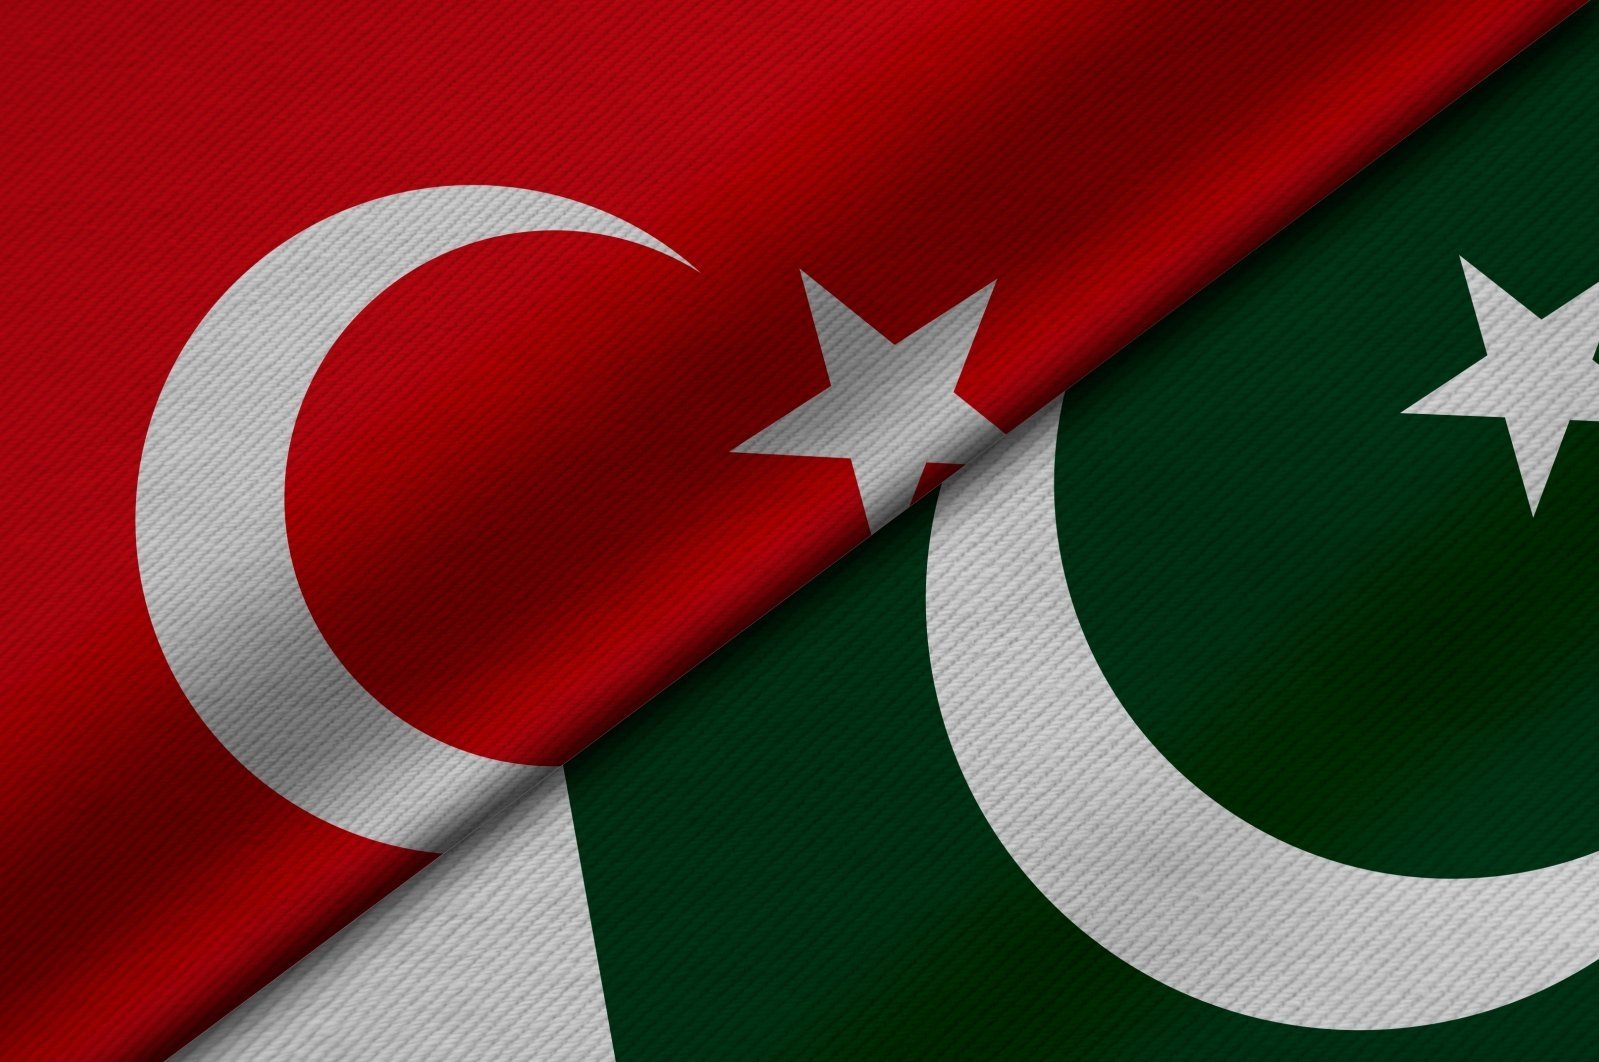 3D rendering of two flags of the Republic of Turkey and Pakistan together (Shutterstock)